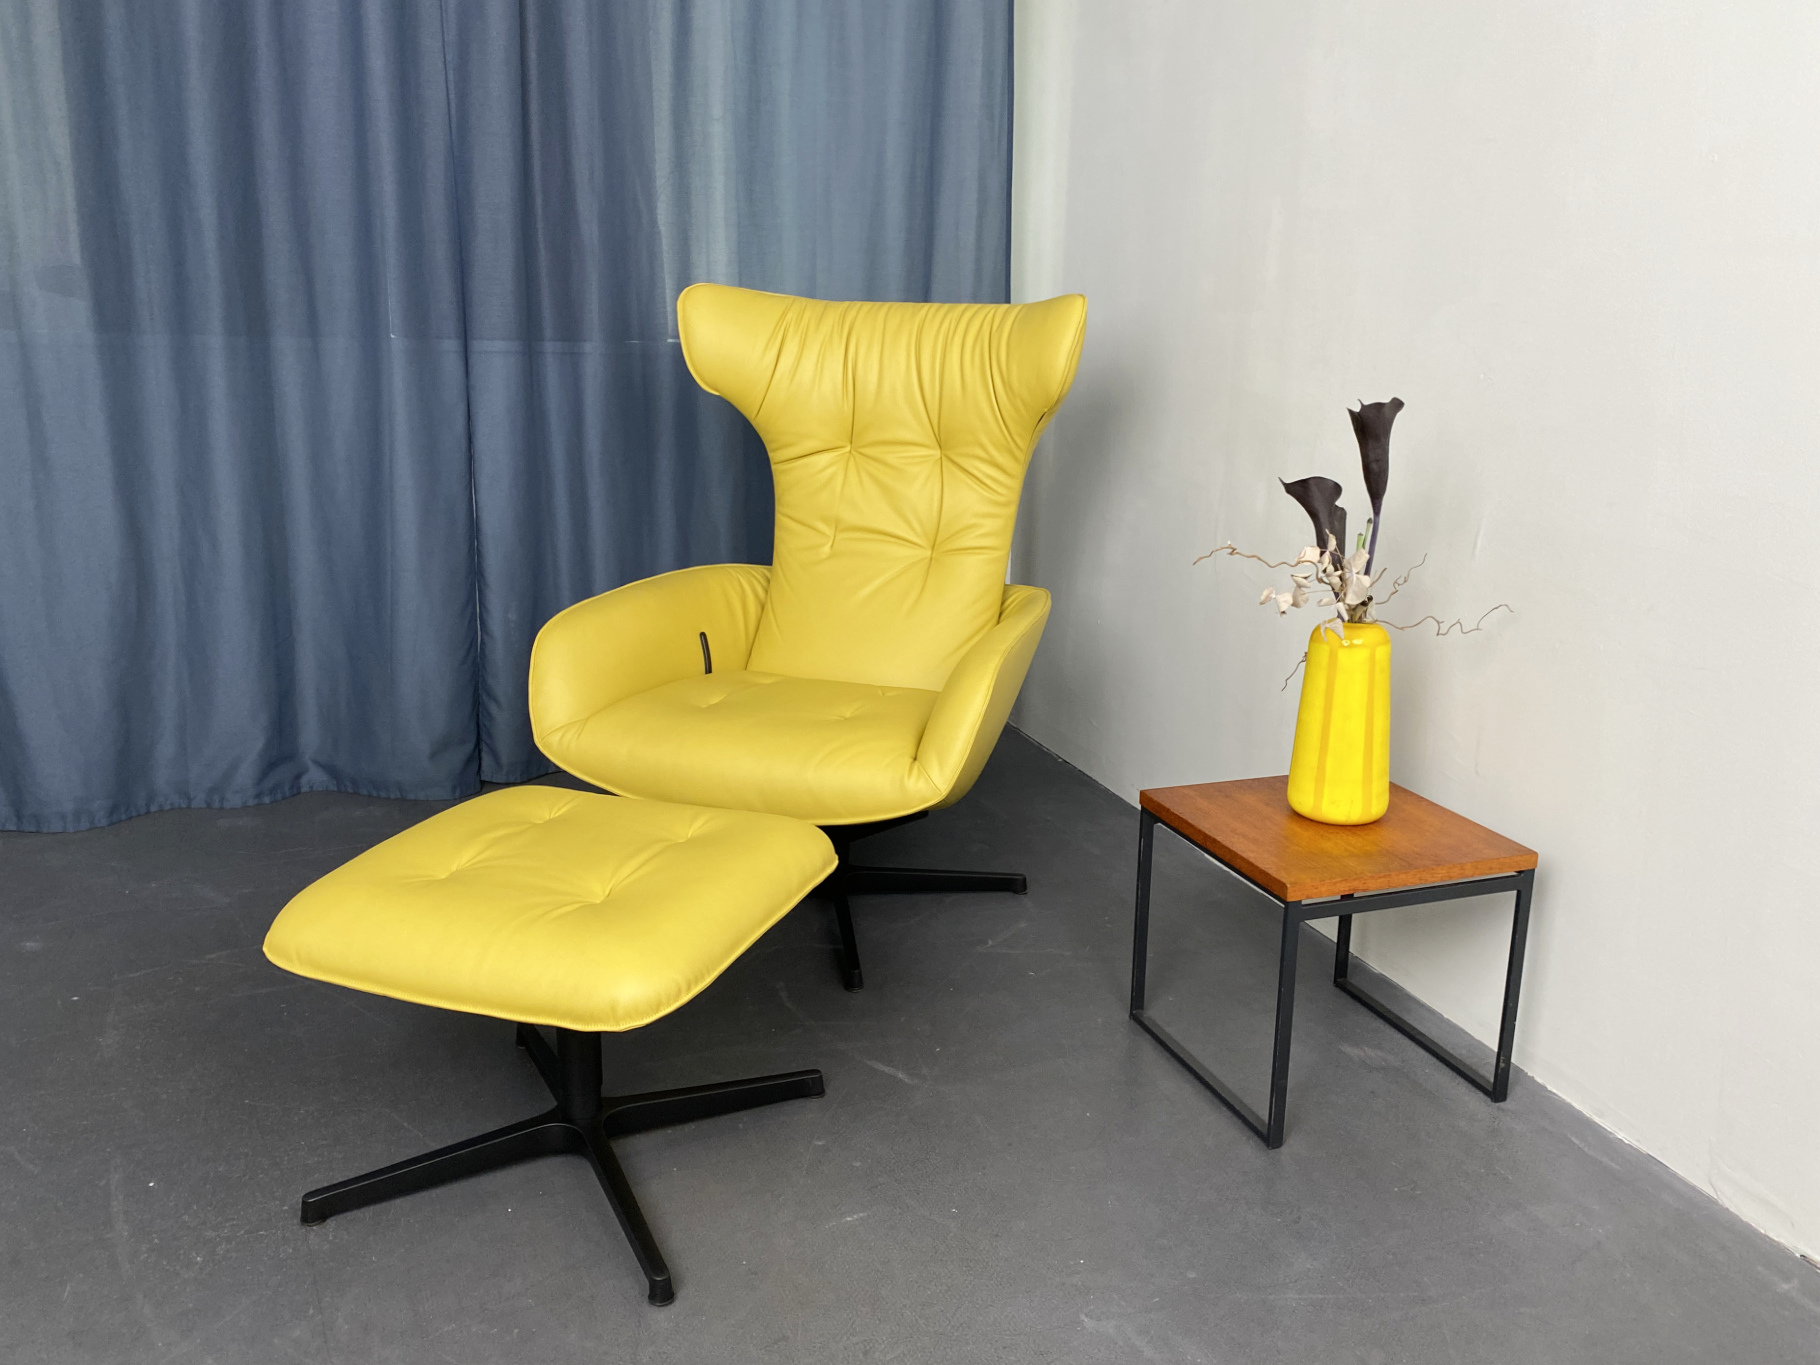 Onsa Lounge Chair with Ottoman, yellow Leather by Mauro Lipparini for Walter Knoll, Germany, 2018